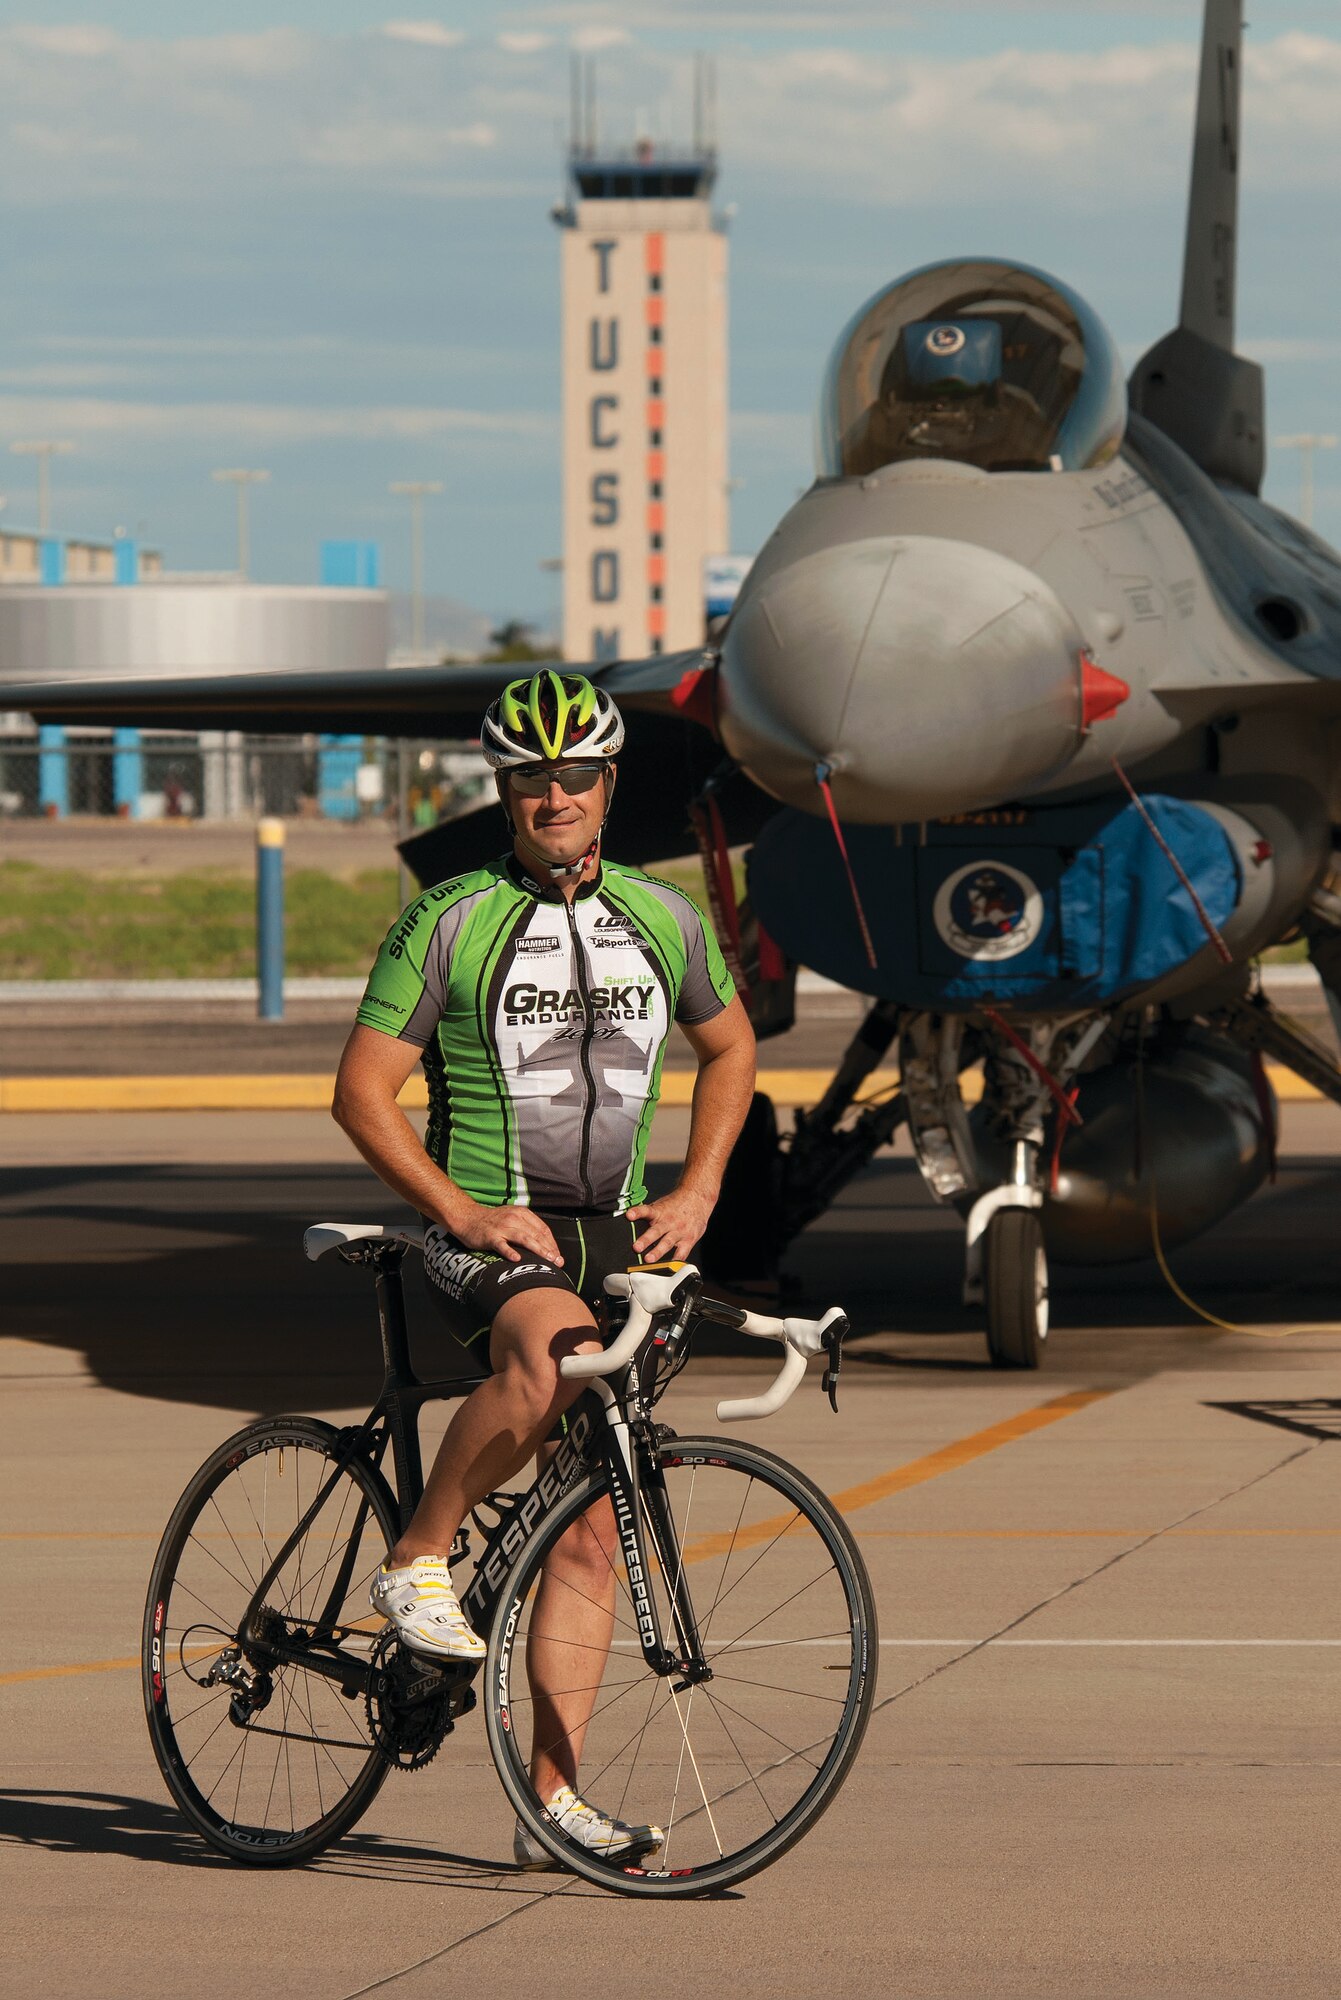 Maj. Brian Grasky, an F-16 Fighting Falcon instructor pilot, highlights his role as an Arizona Air National Guardsman as well as his off-duty role as a triathlon coach on the 162nd Fighter Wing flightline at Tucson International Airport. Grasky is among several avid cyclists featured in a new book, Tucson Spokes, about the city’s cycling scene. (Courtesy photo by Chris Mooney)